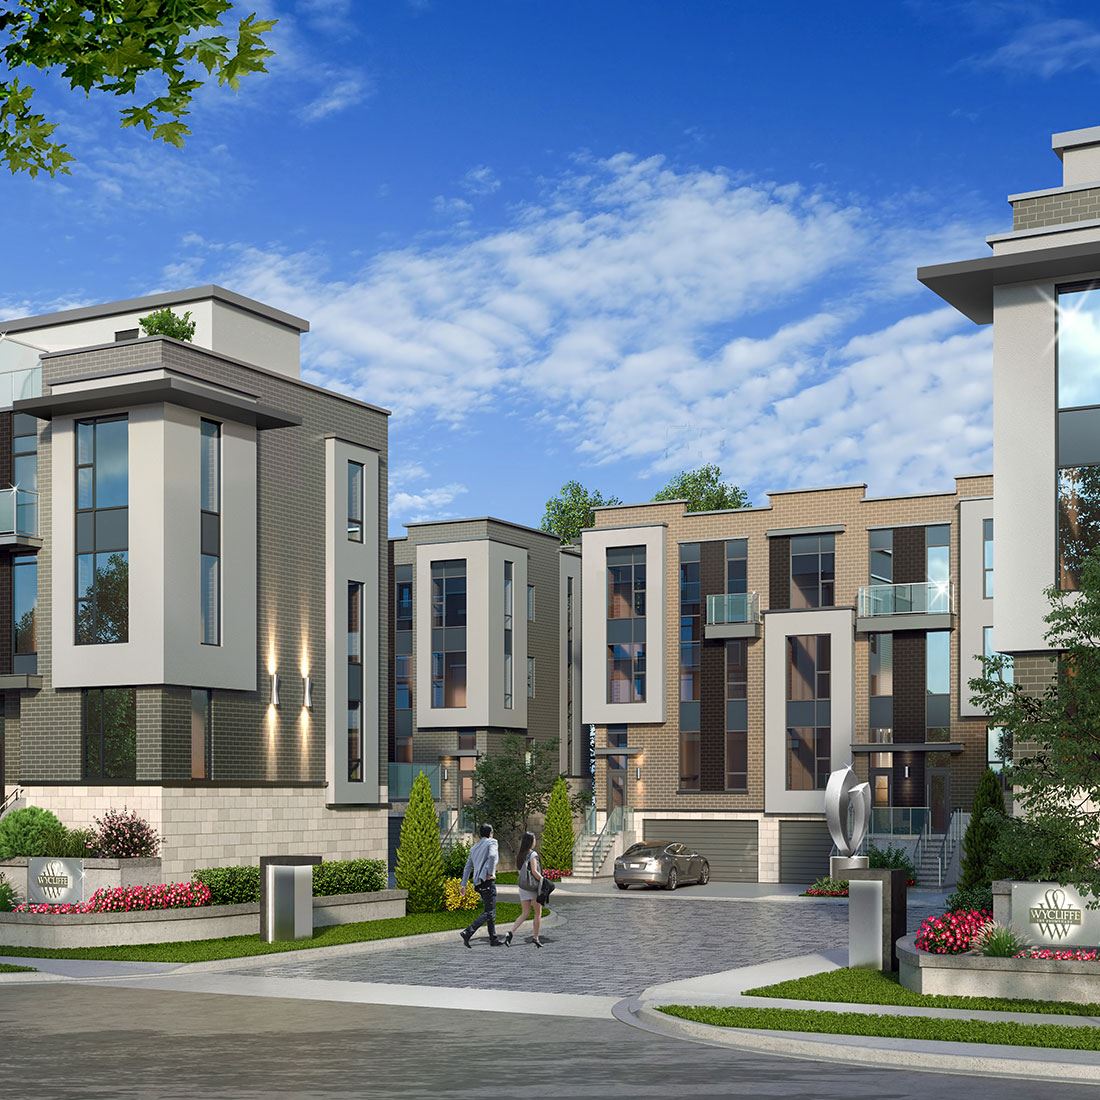 Exterior rendering of the Wycliffe Promenade Towns entrance.